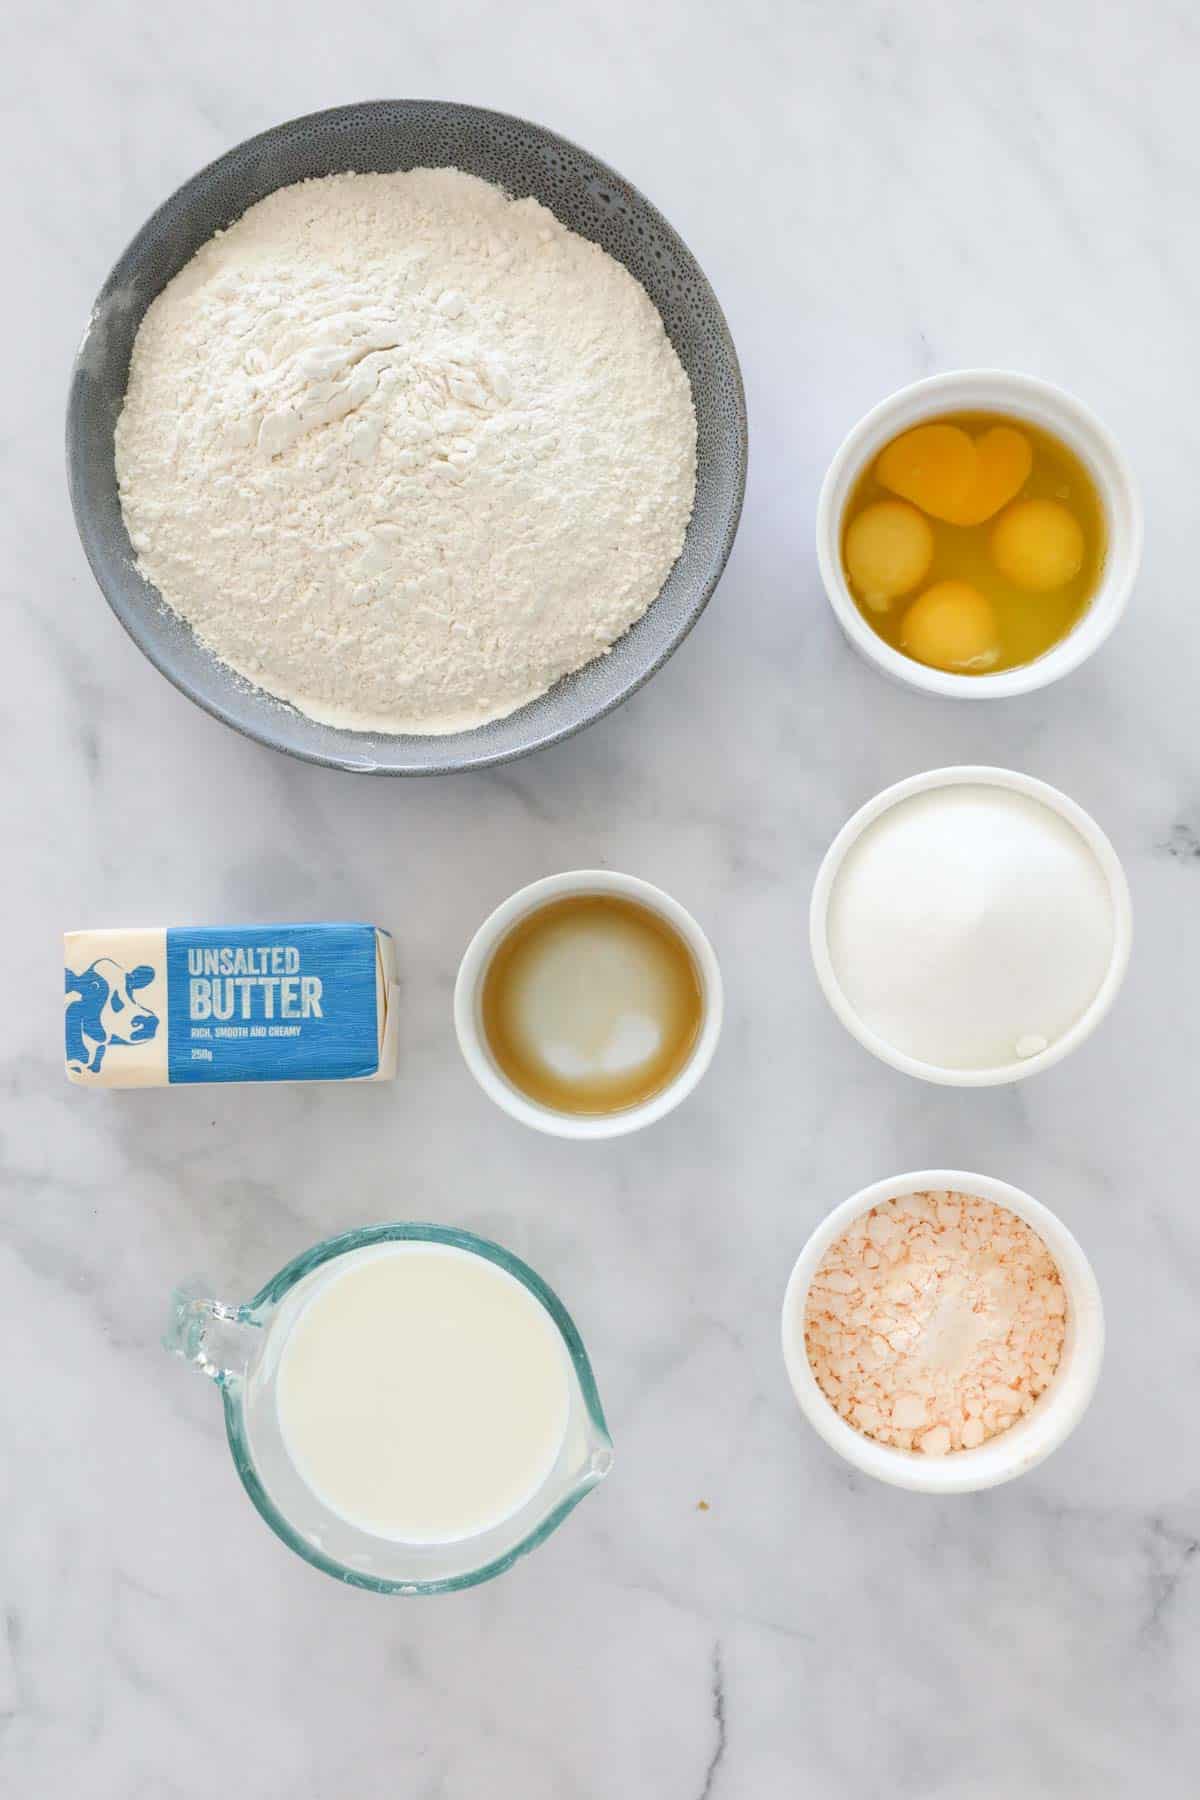 The ingredients needed for a cake weighed out in individual bowls.